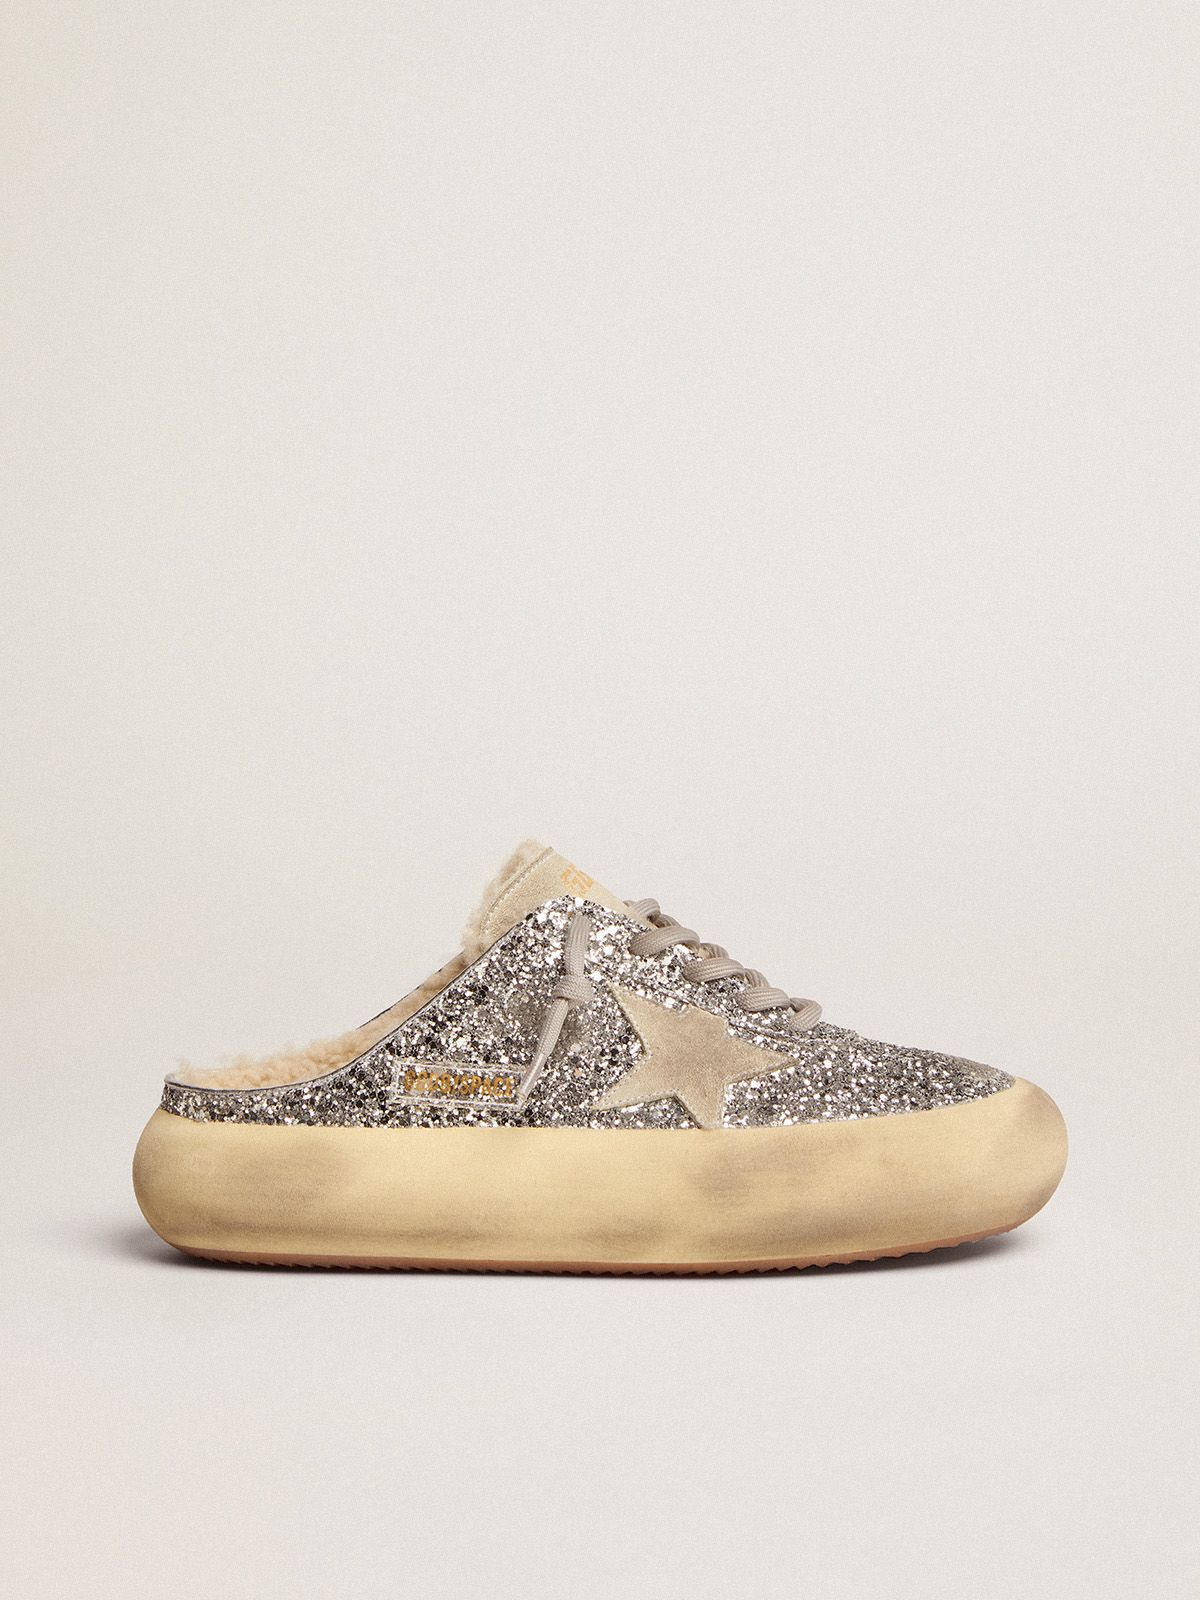 golden goose silver in Space-Star Sabot shearling lining with shoes glitter